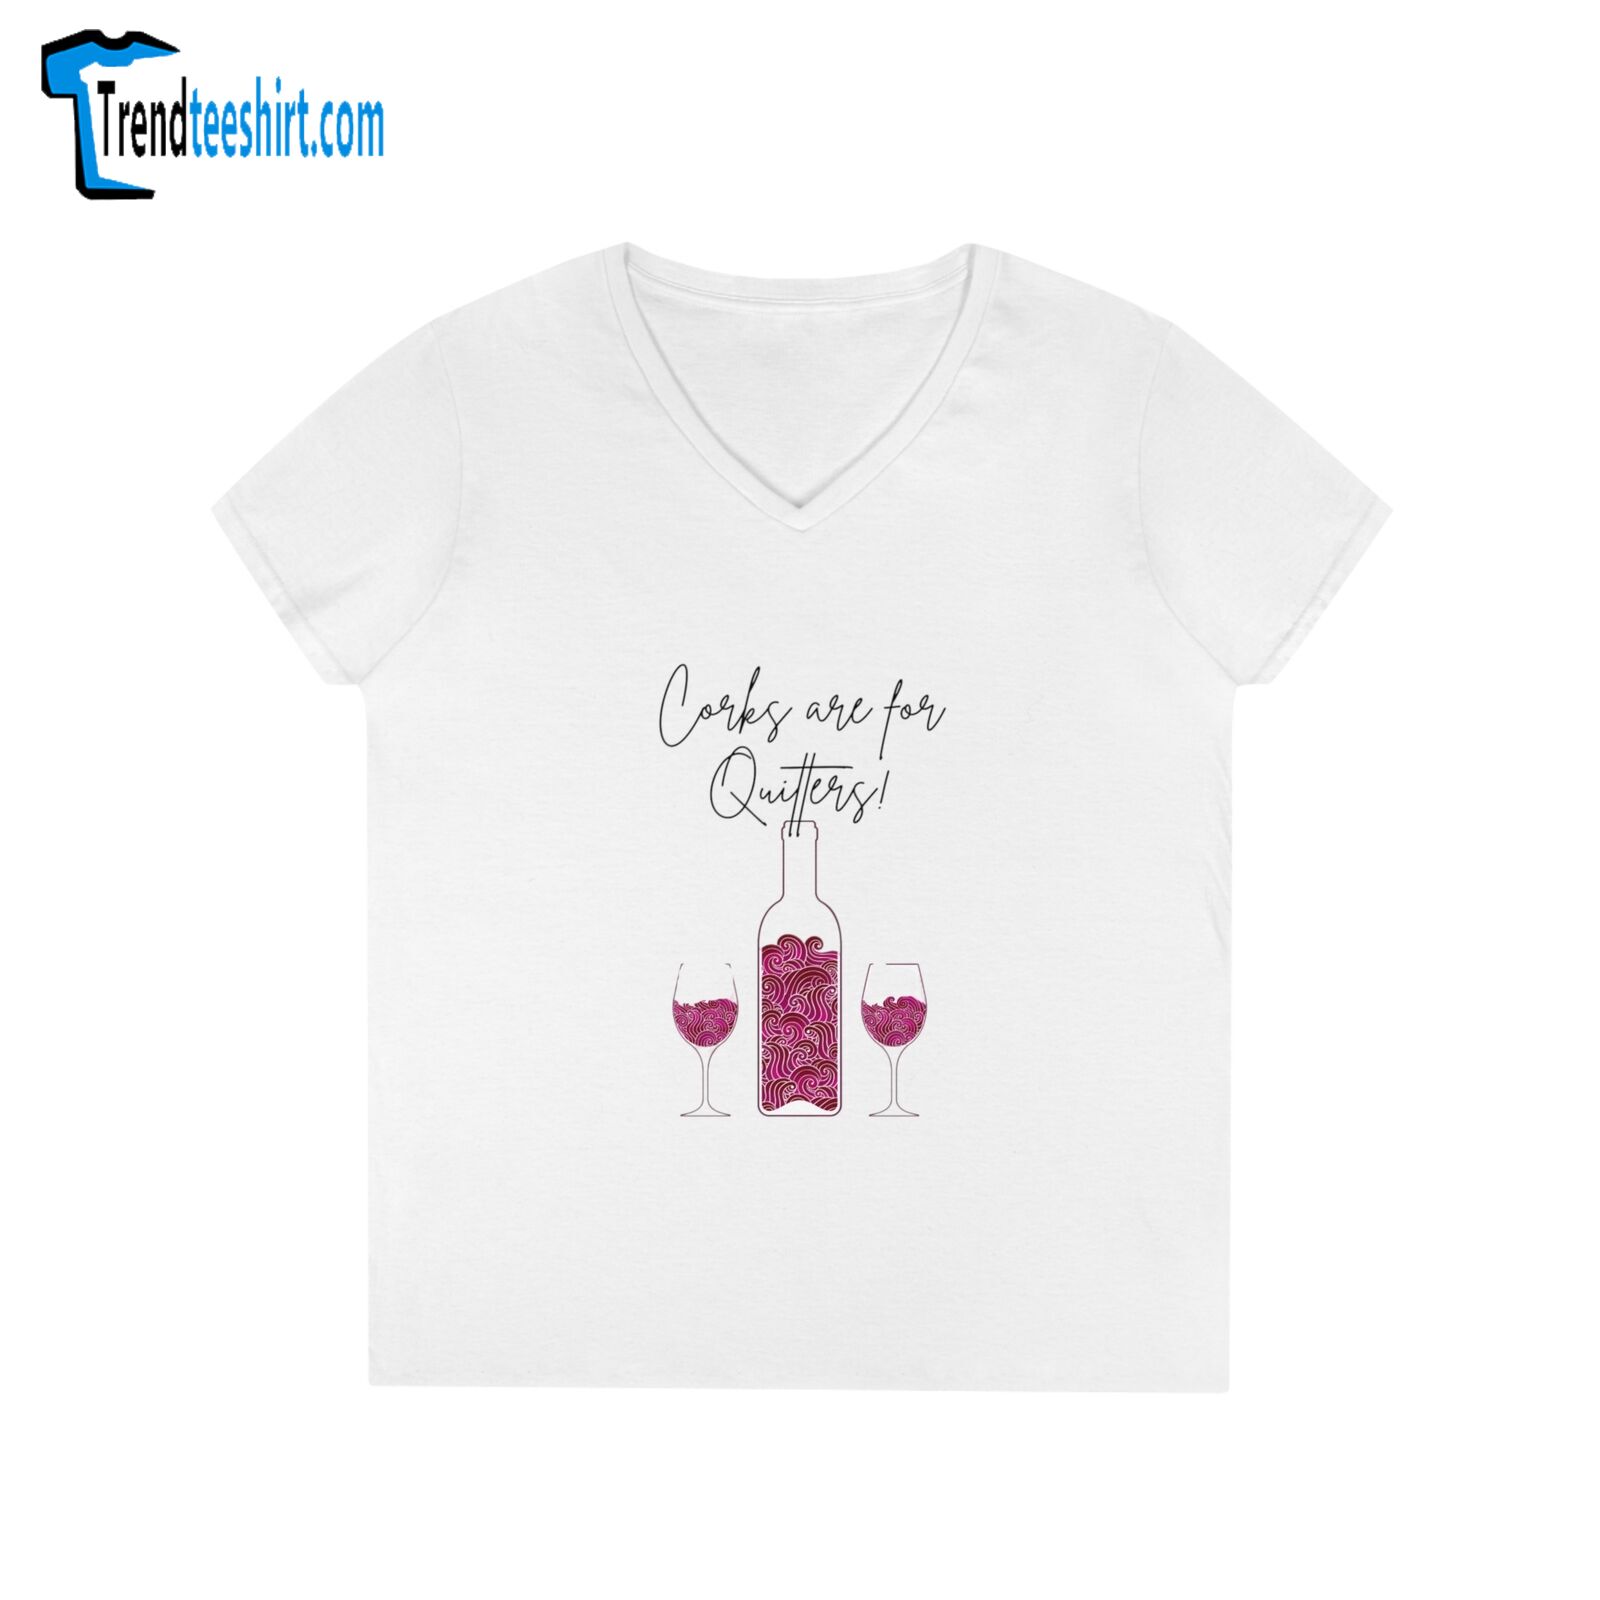 Wine T-shirtfunny T-shirtmother's Day Giftwine Lovers Shirt